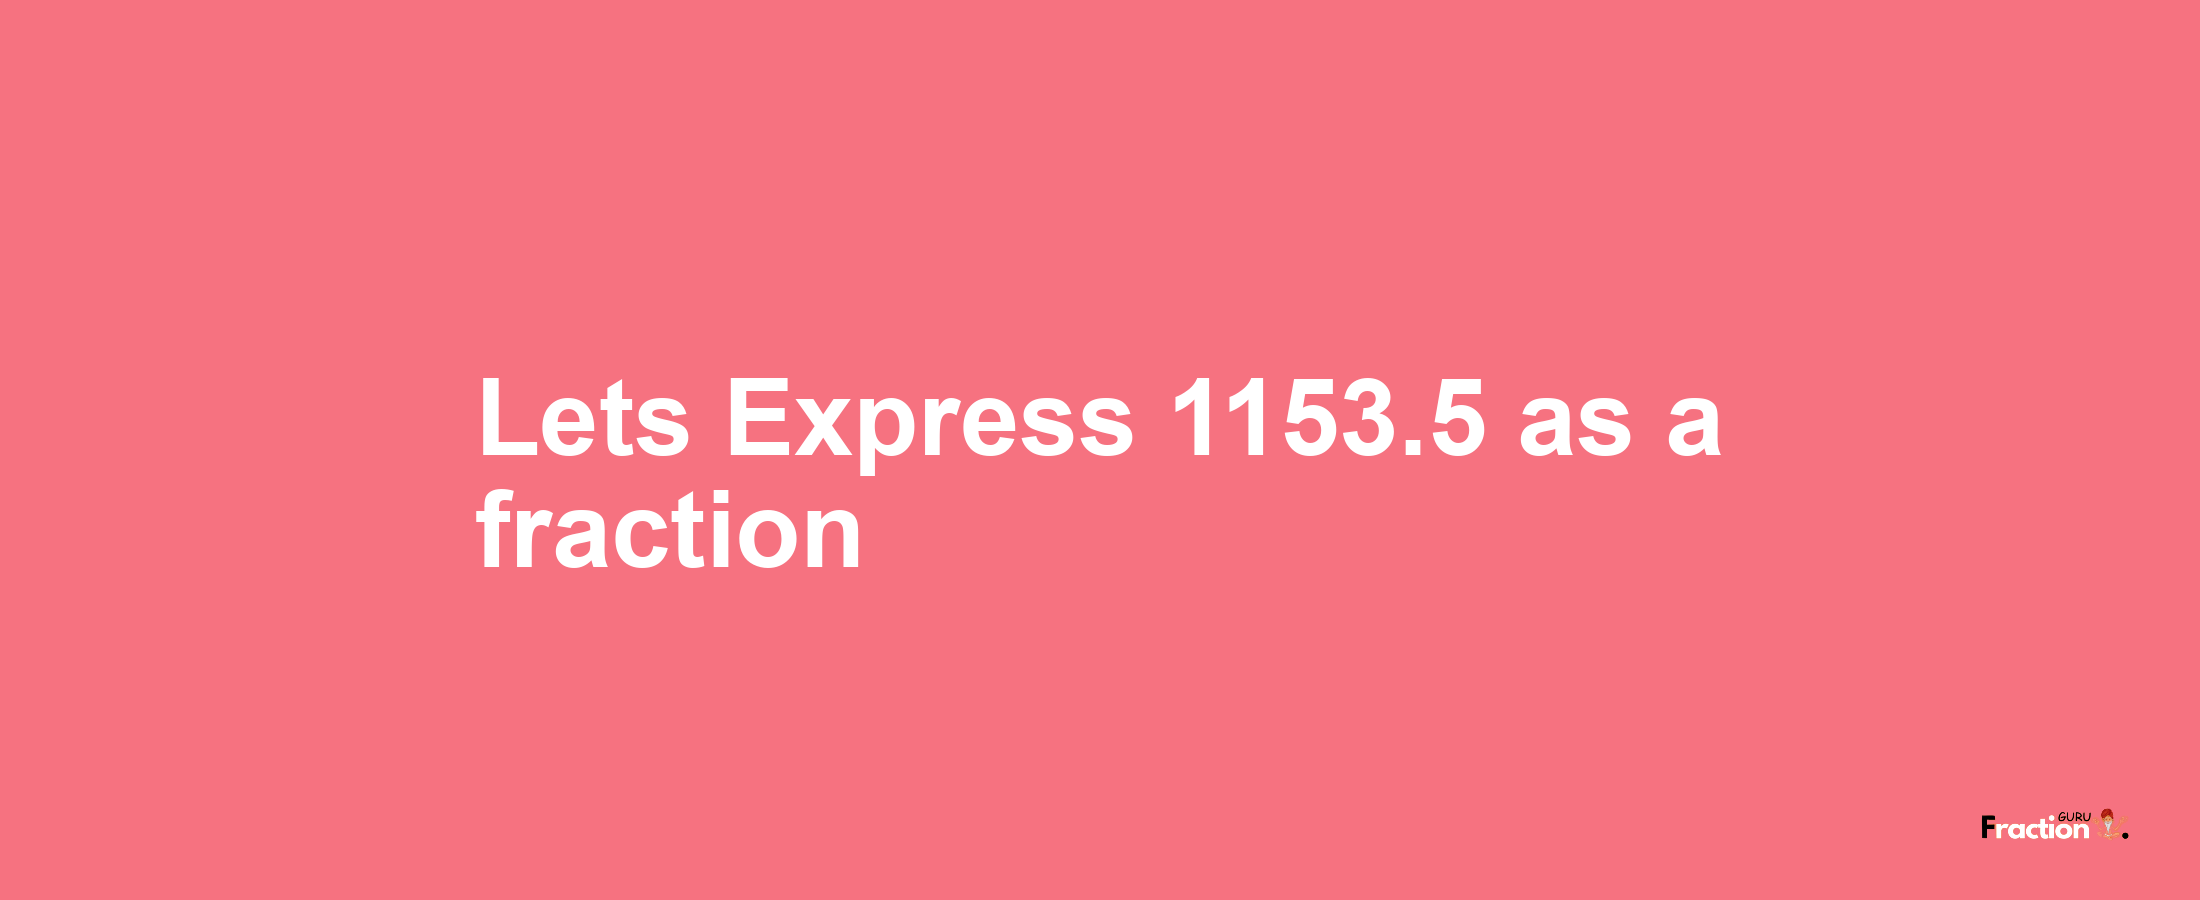 Lets Express 1153.5 as afraction